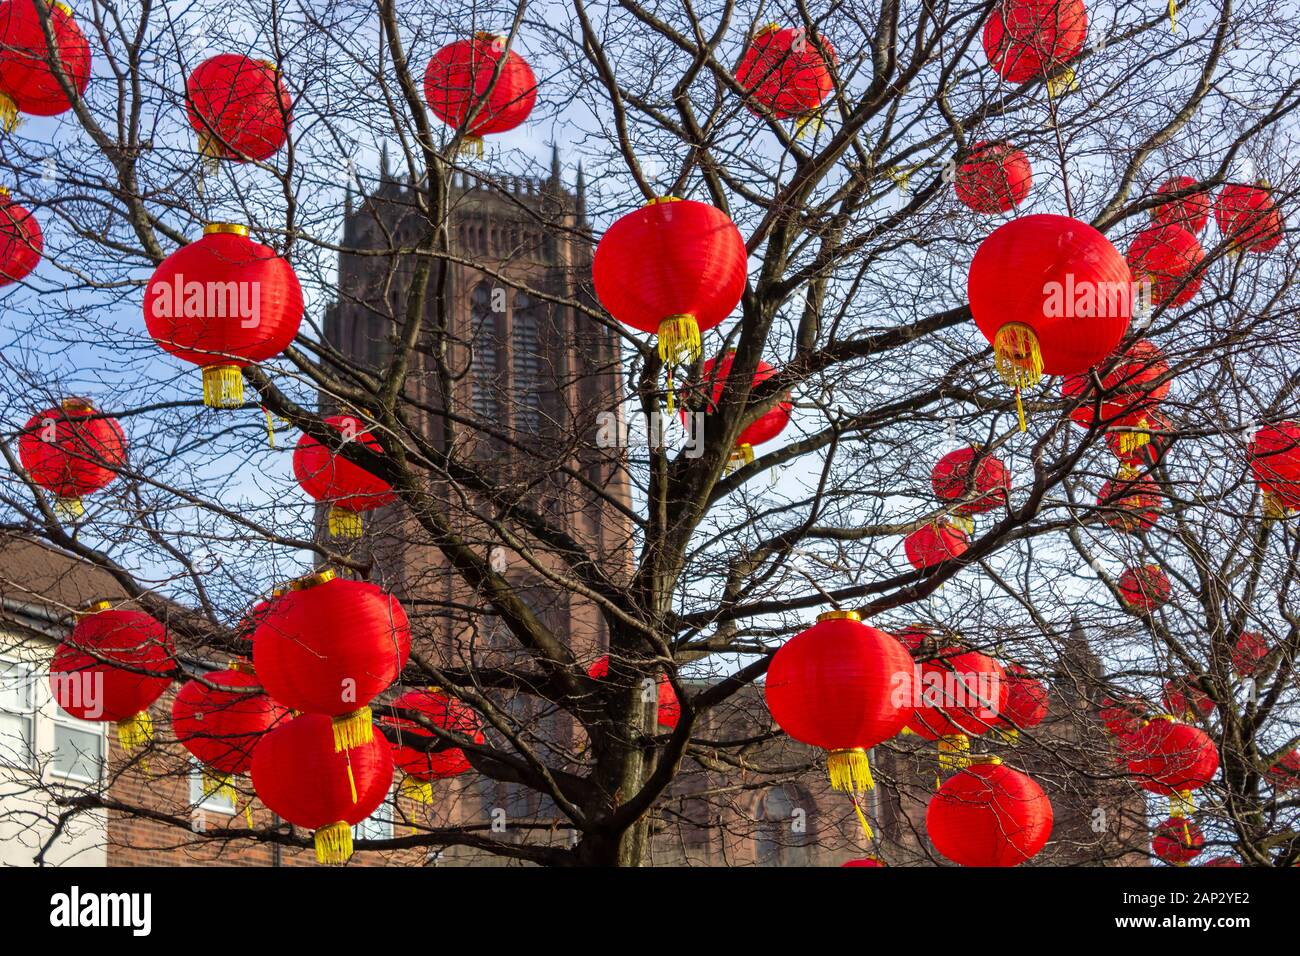 Lanterns in trees during Chinese New Year celebration festival with Liverpool Anglican cathedral in background, Grenville Street South, Liverpool Stock Photo